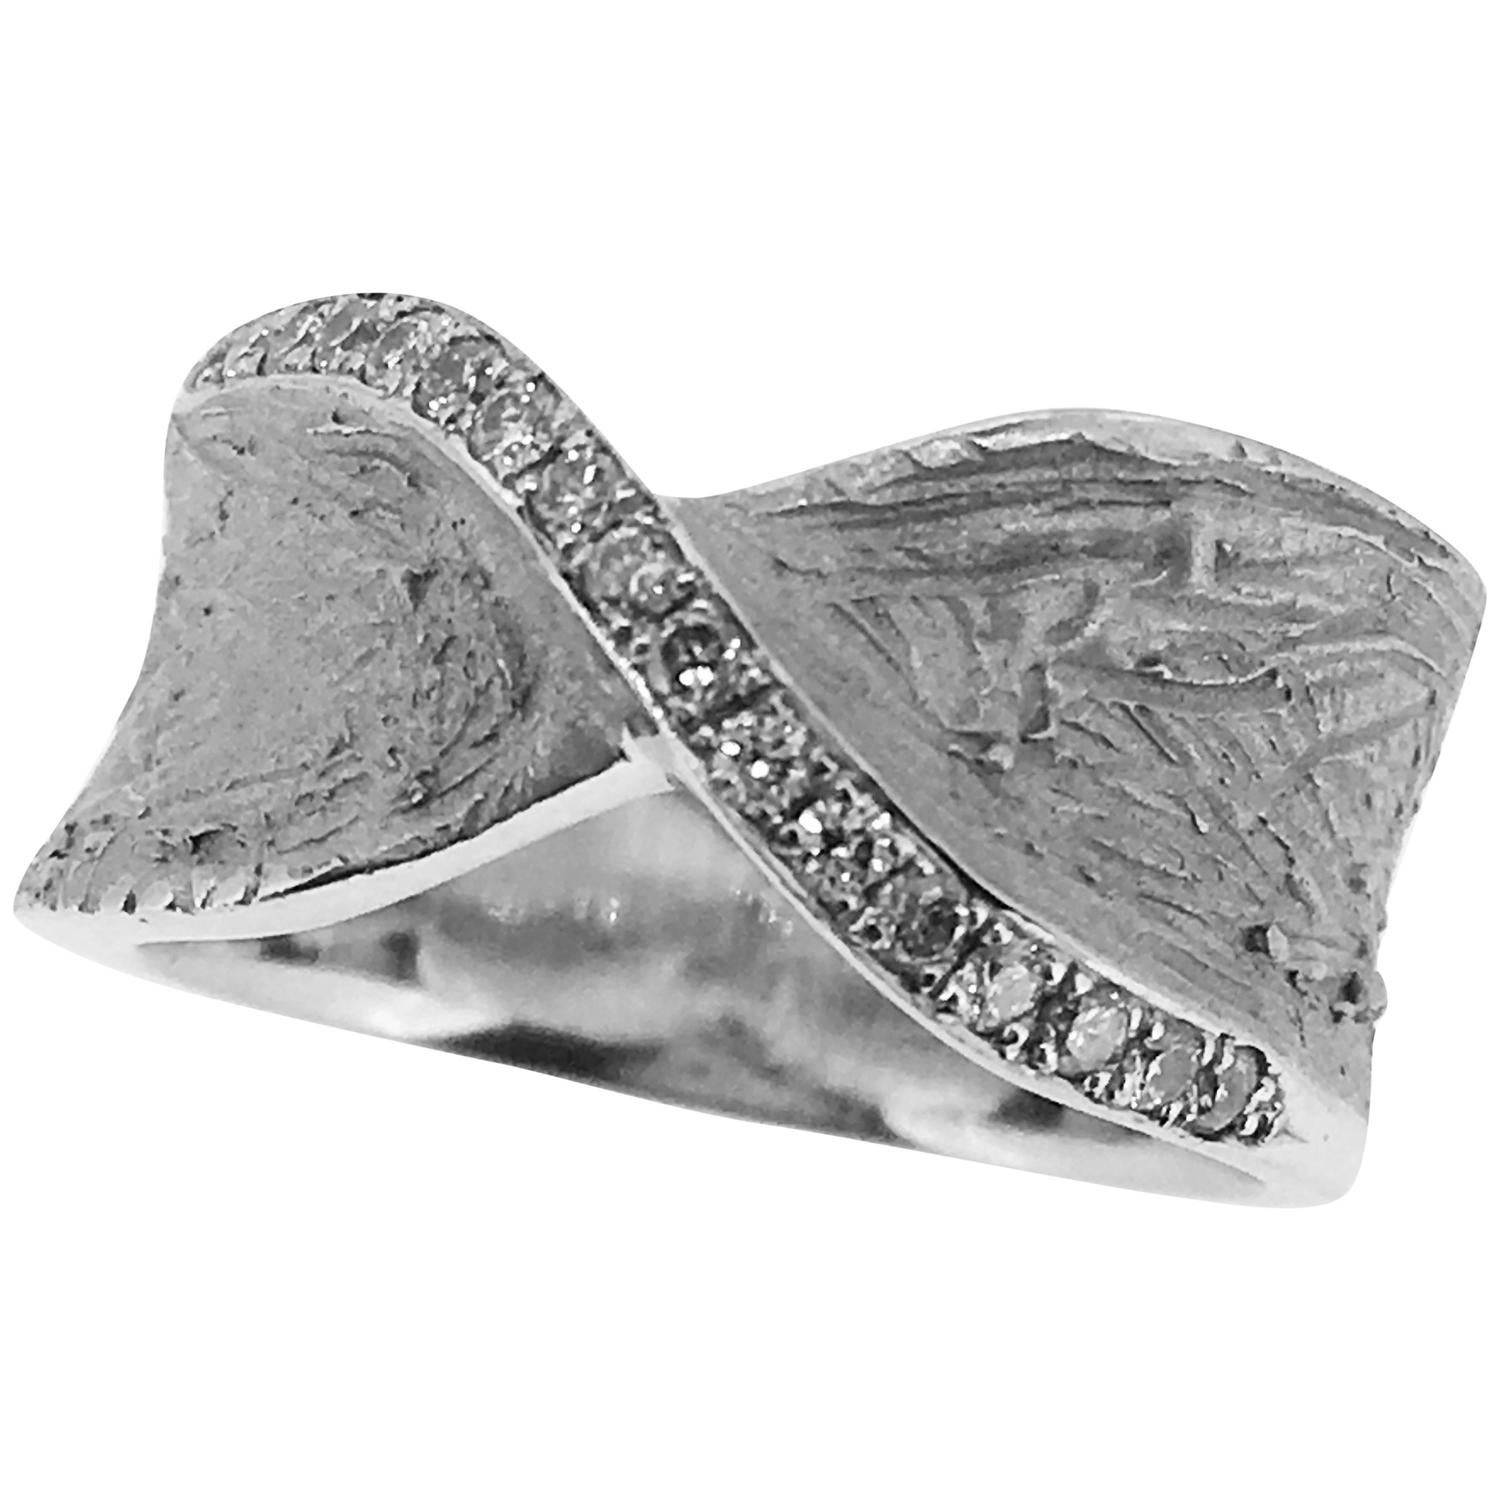 S Van Giel Diamonds Gold Gothic  Wedding  Ring  For Sale  at 